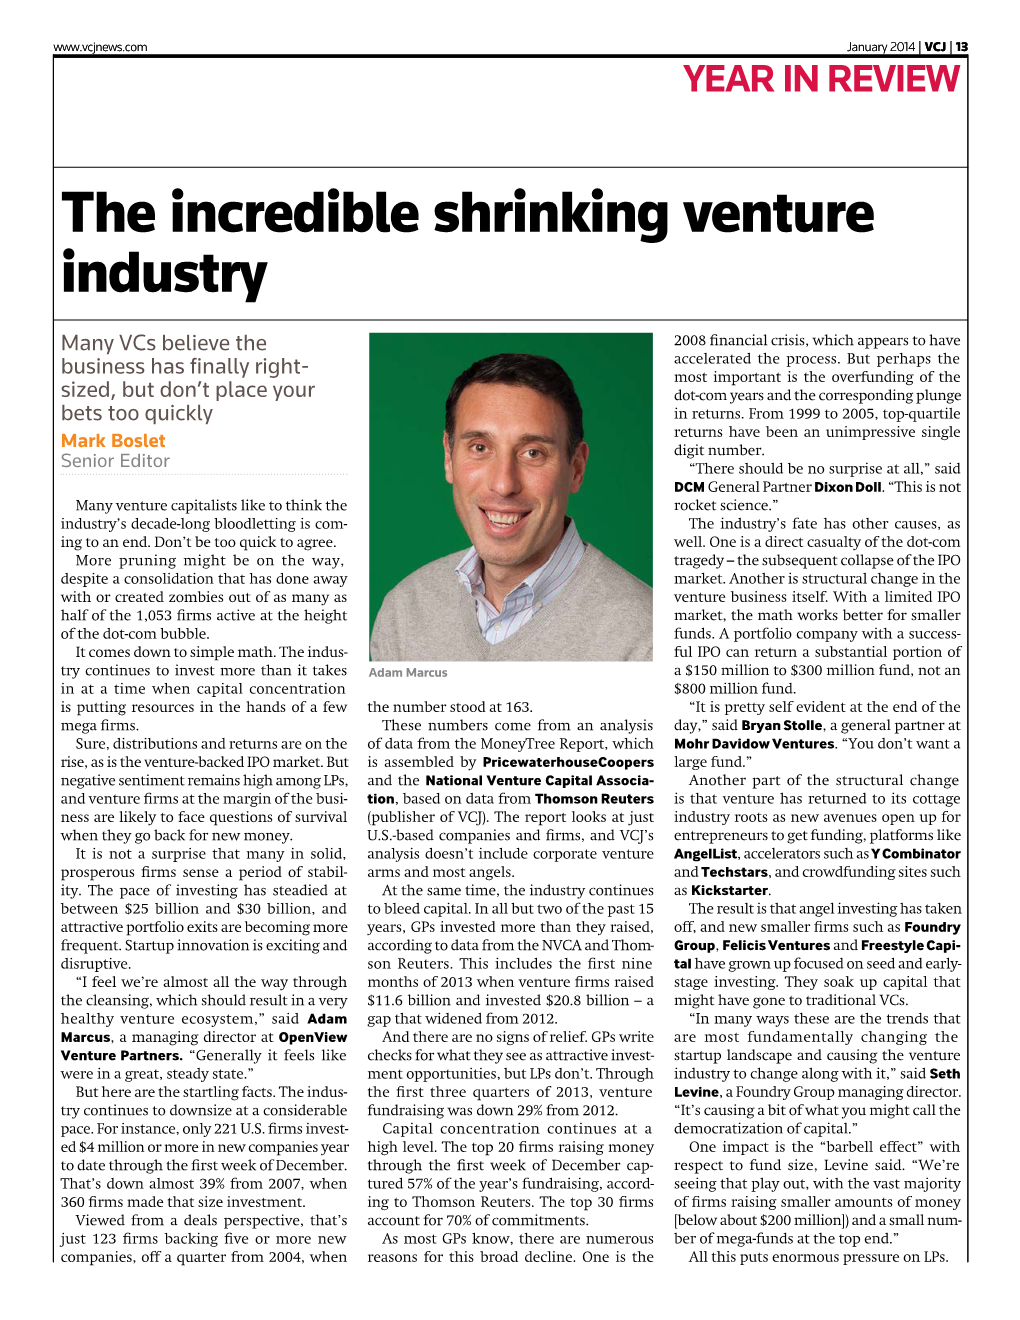 The Incredible Shrinking Venture Industry